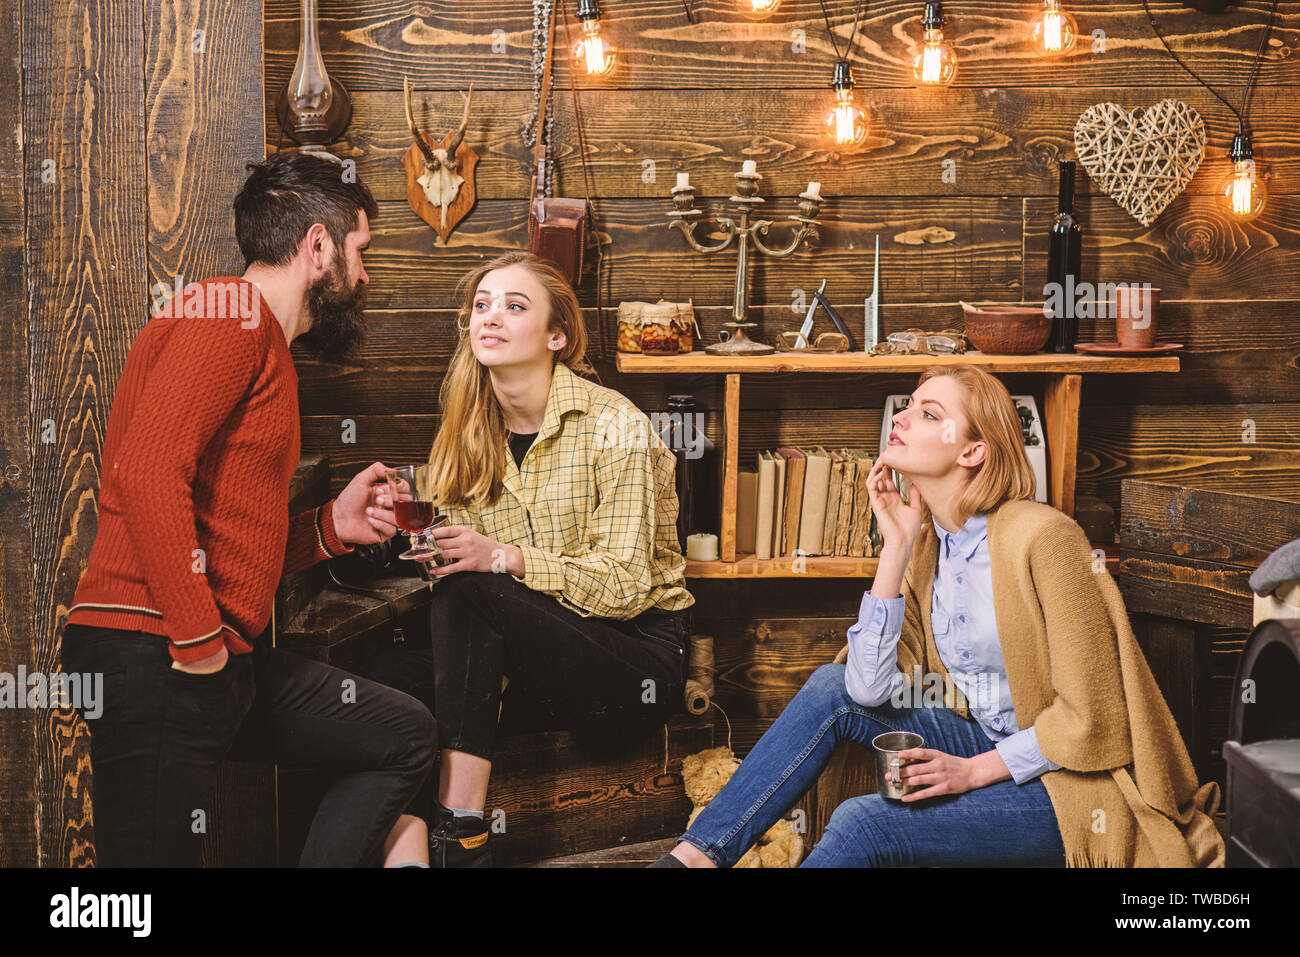 Friends, family spend pleasant evening, interior background. Family enjoy conversation in gamekeepers house. Girls and man on relaxed faces hold metallic mugs, talking. Sincere conversation concept. Stock Photo